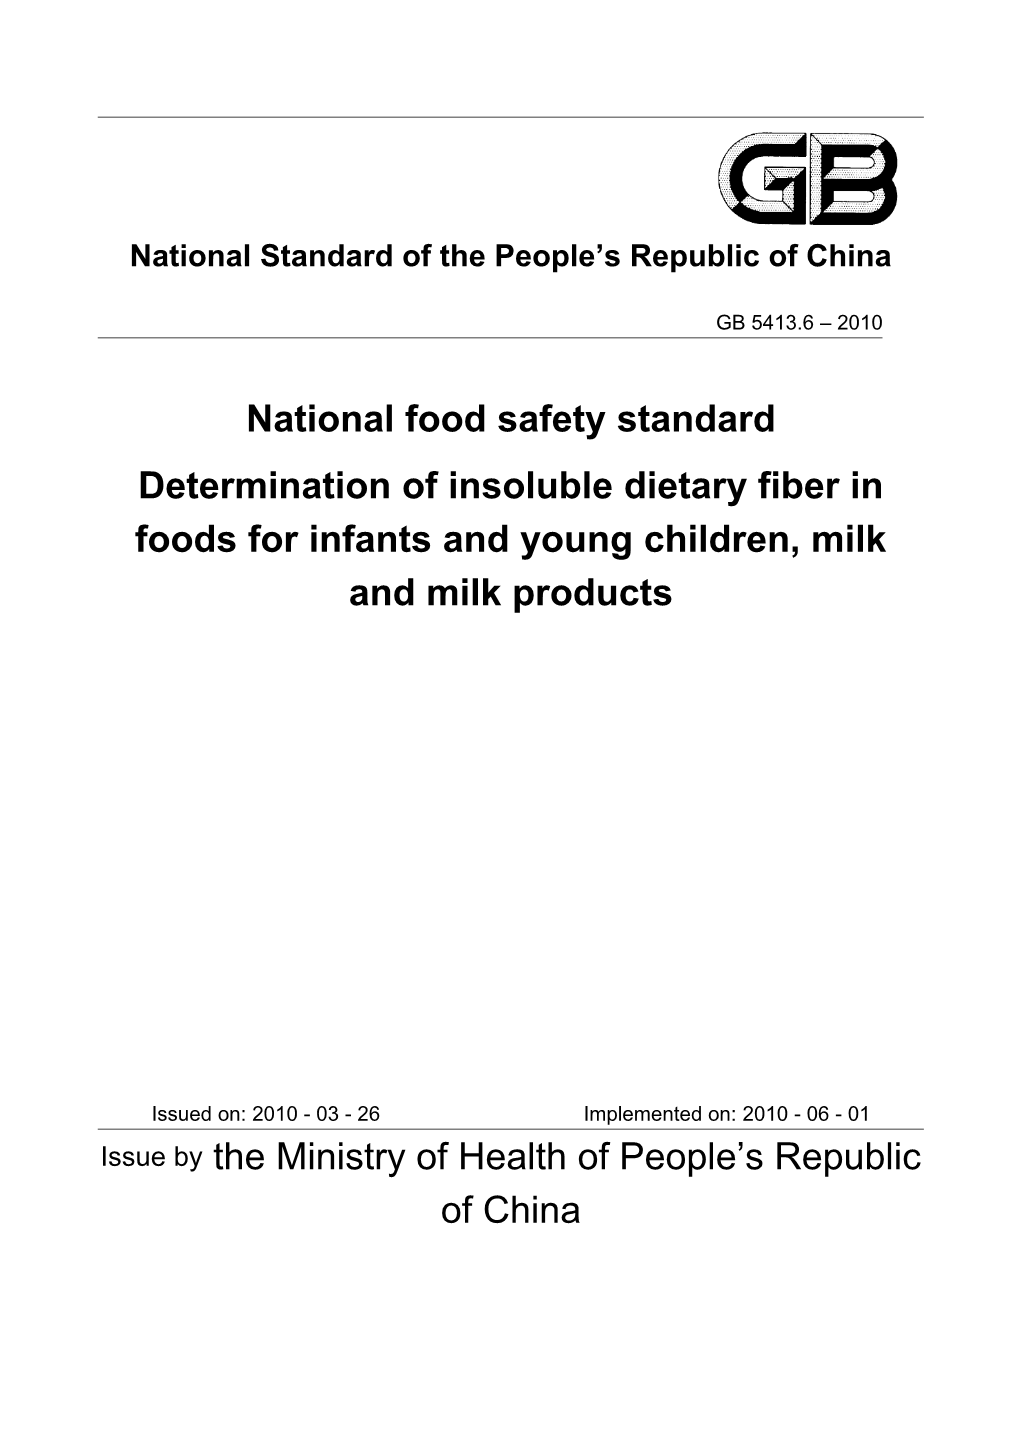 Determination of Insoluble Dietary Fiber in Foods for Infants and Young Children, Raw Milk